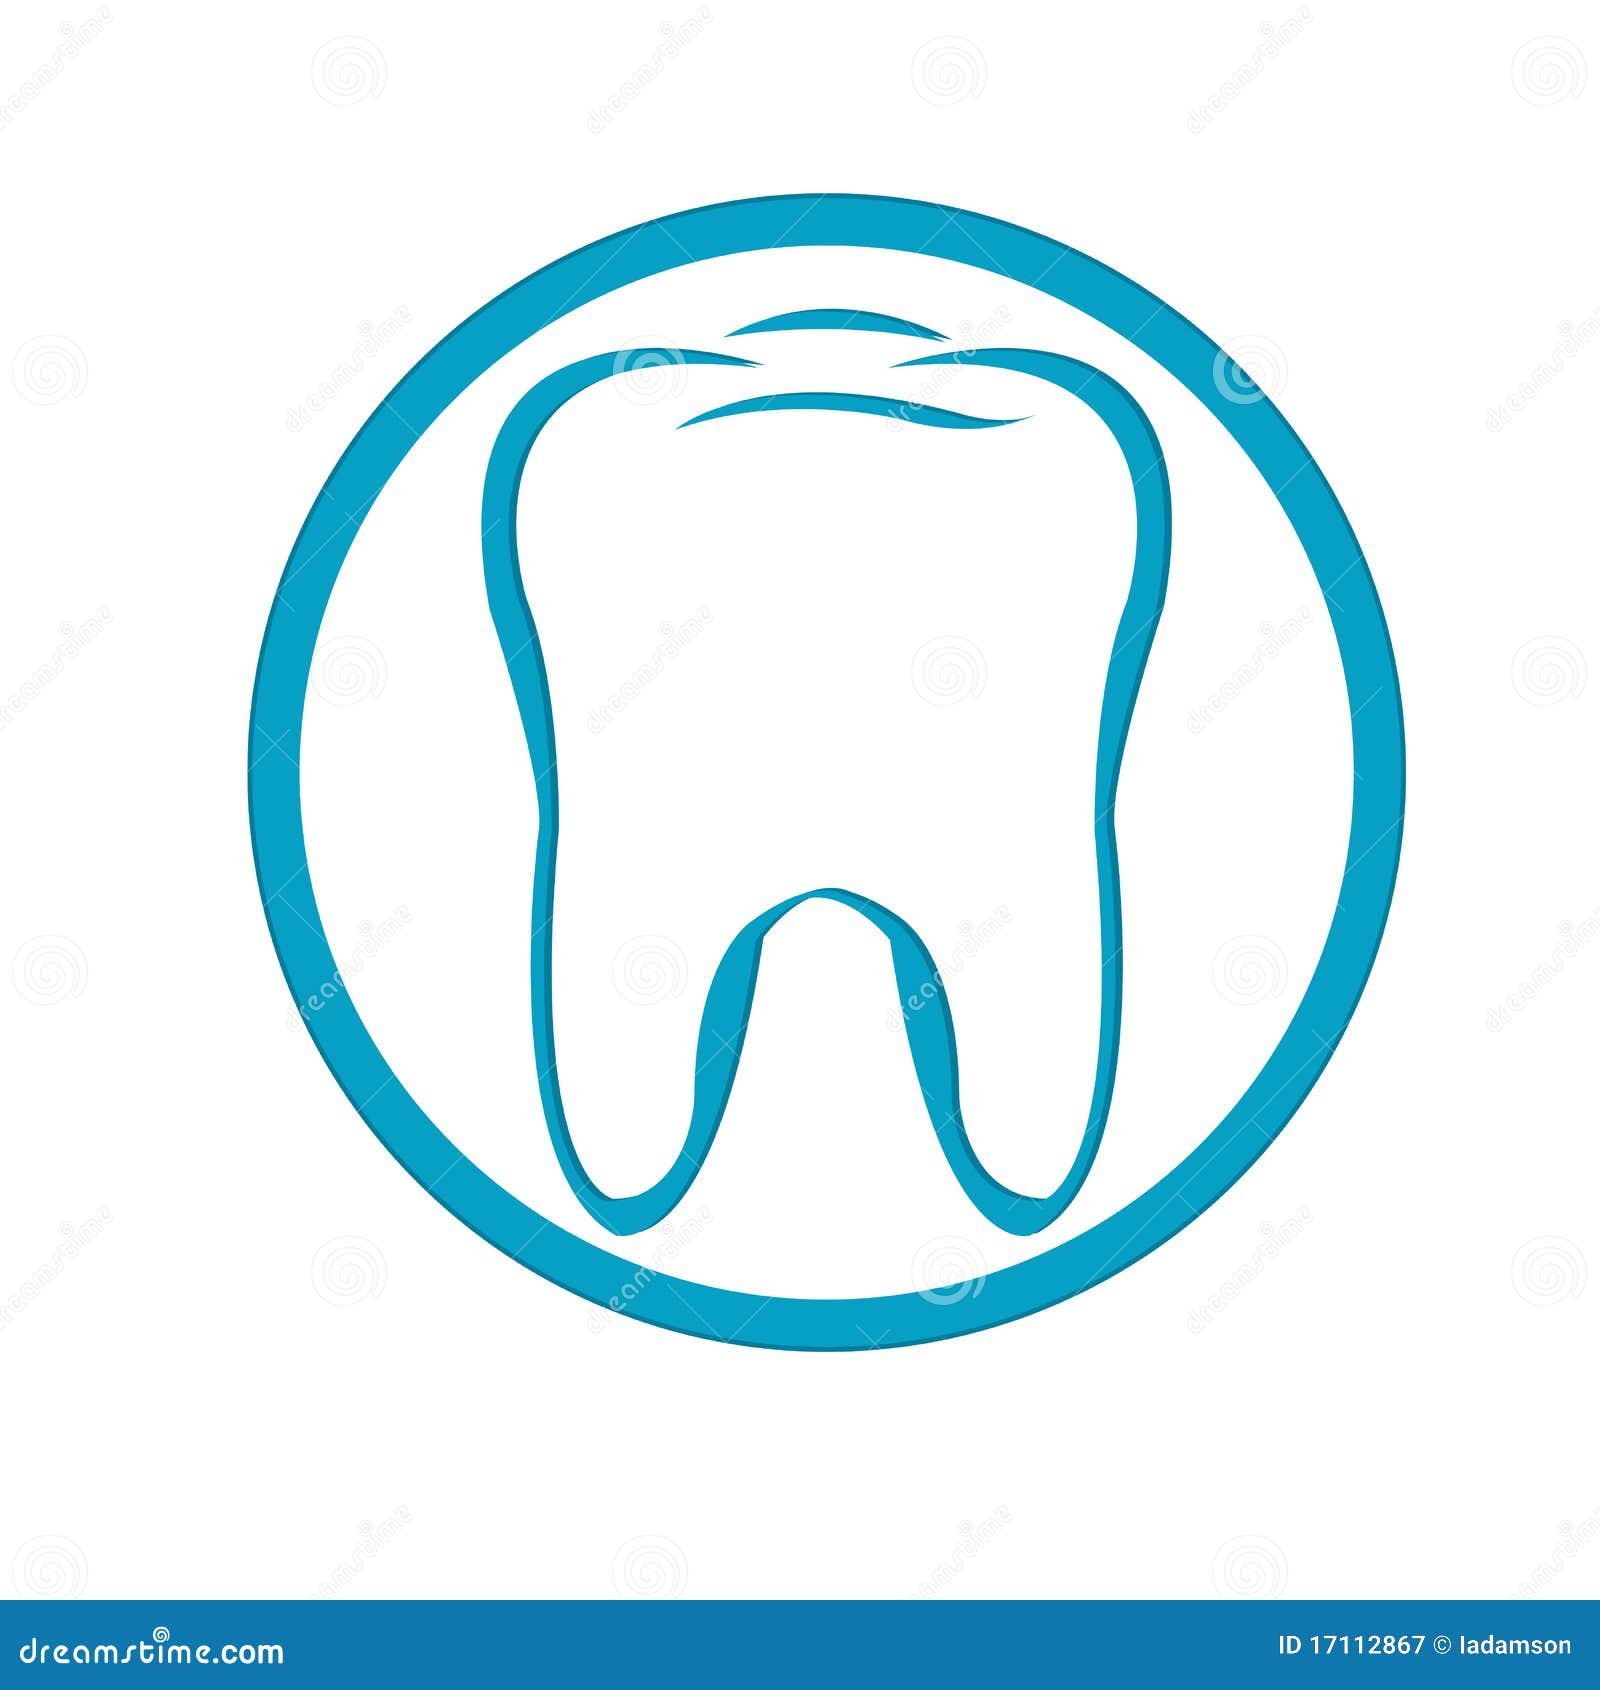 tooth clip art free download - photo #44